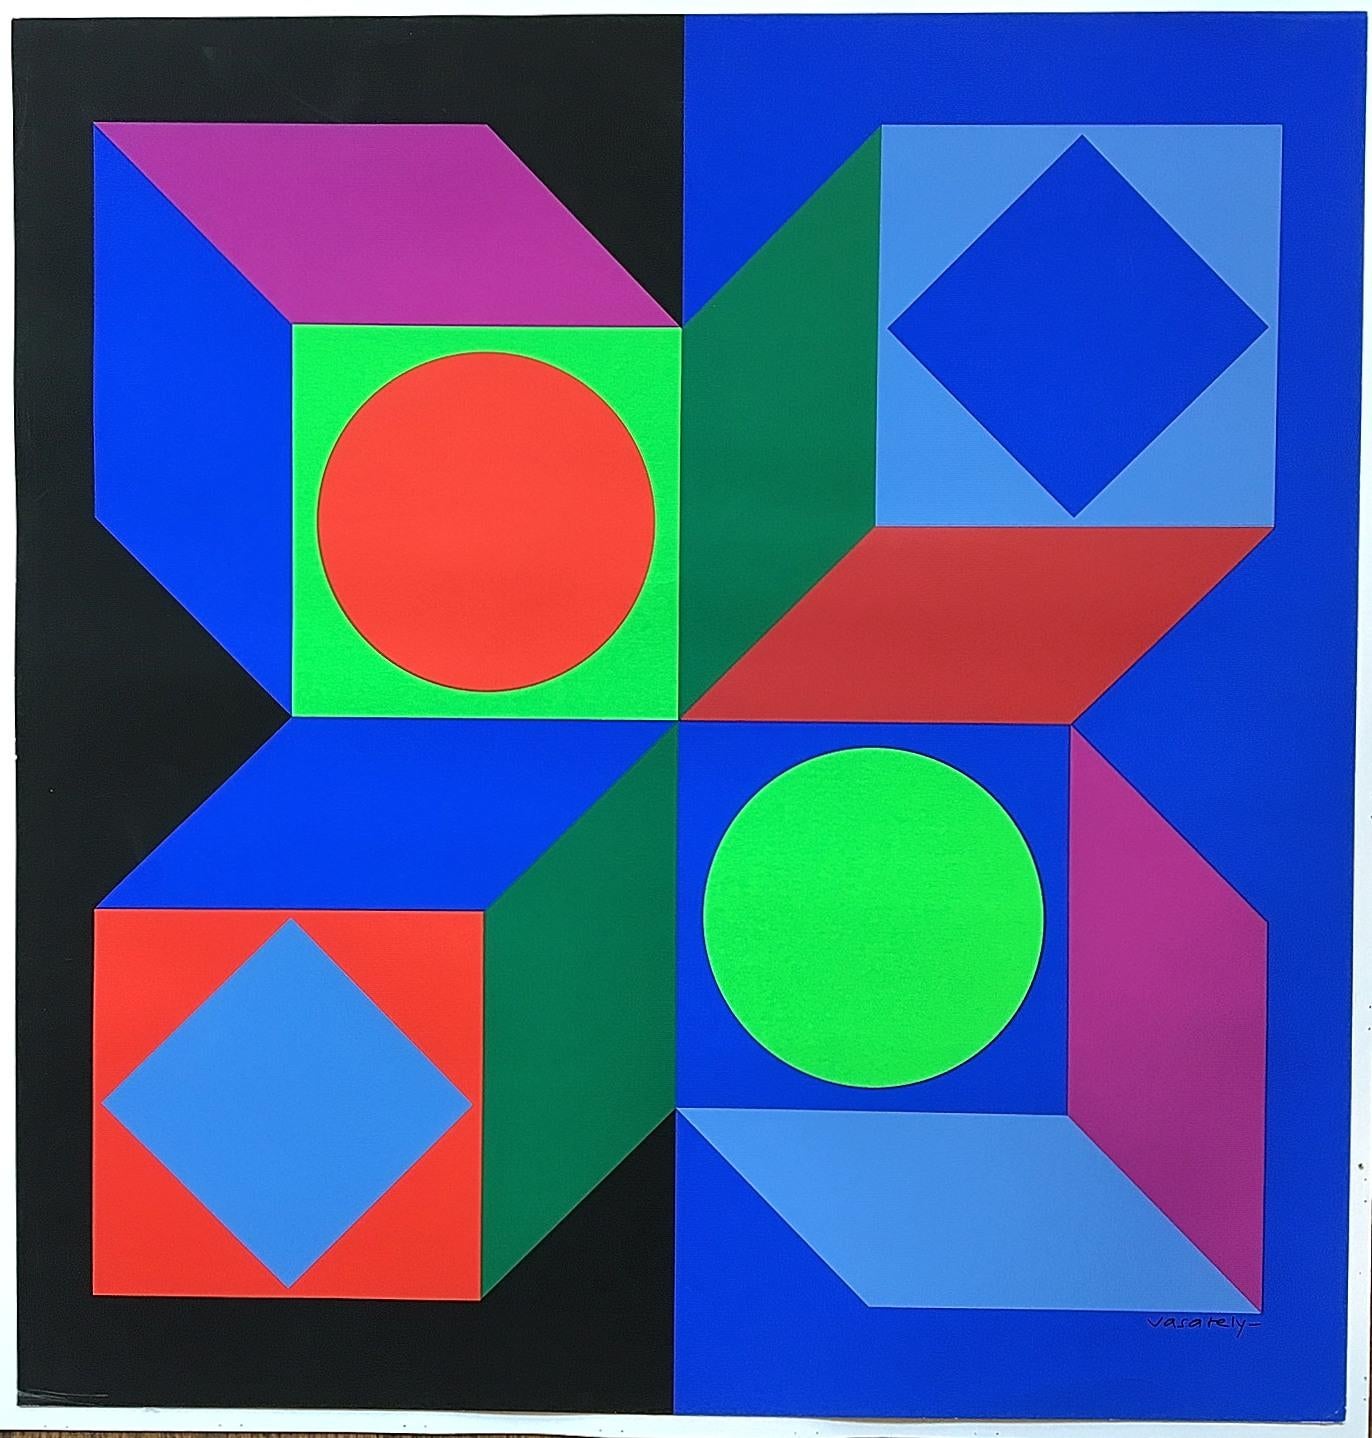 Op Art signed Victor Vasarely silk screen print.
Beautiful silk screen print Art work, circa 1968 by Victor Vasarely. The Art work has some small imperfections matching it's age and can be seen in the images taken when the silk screen print was out